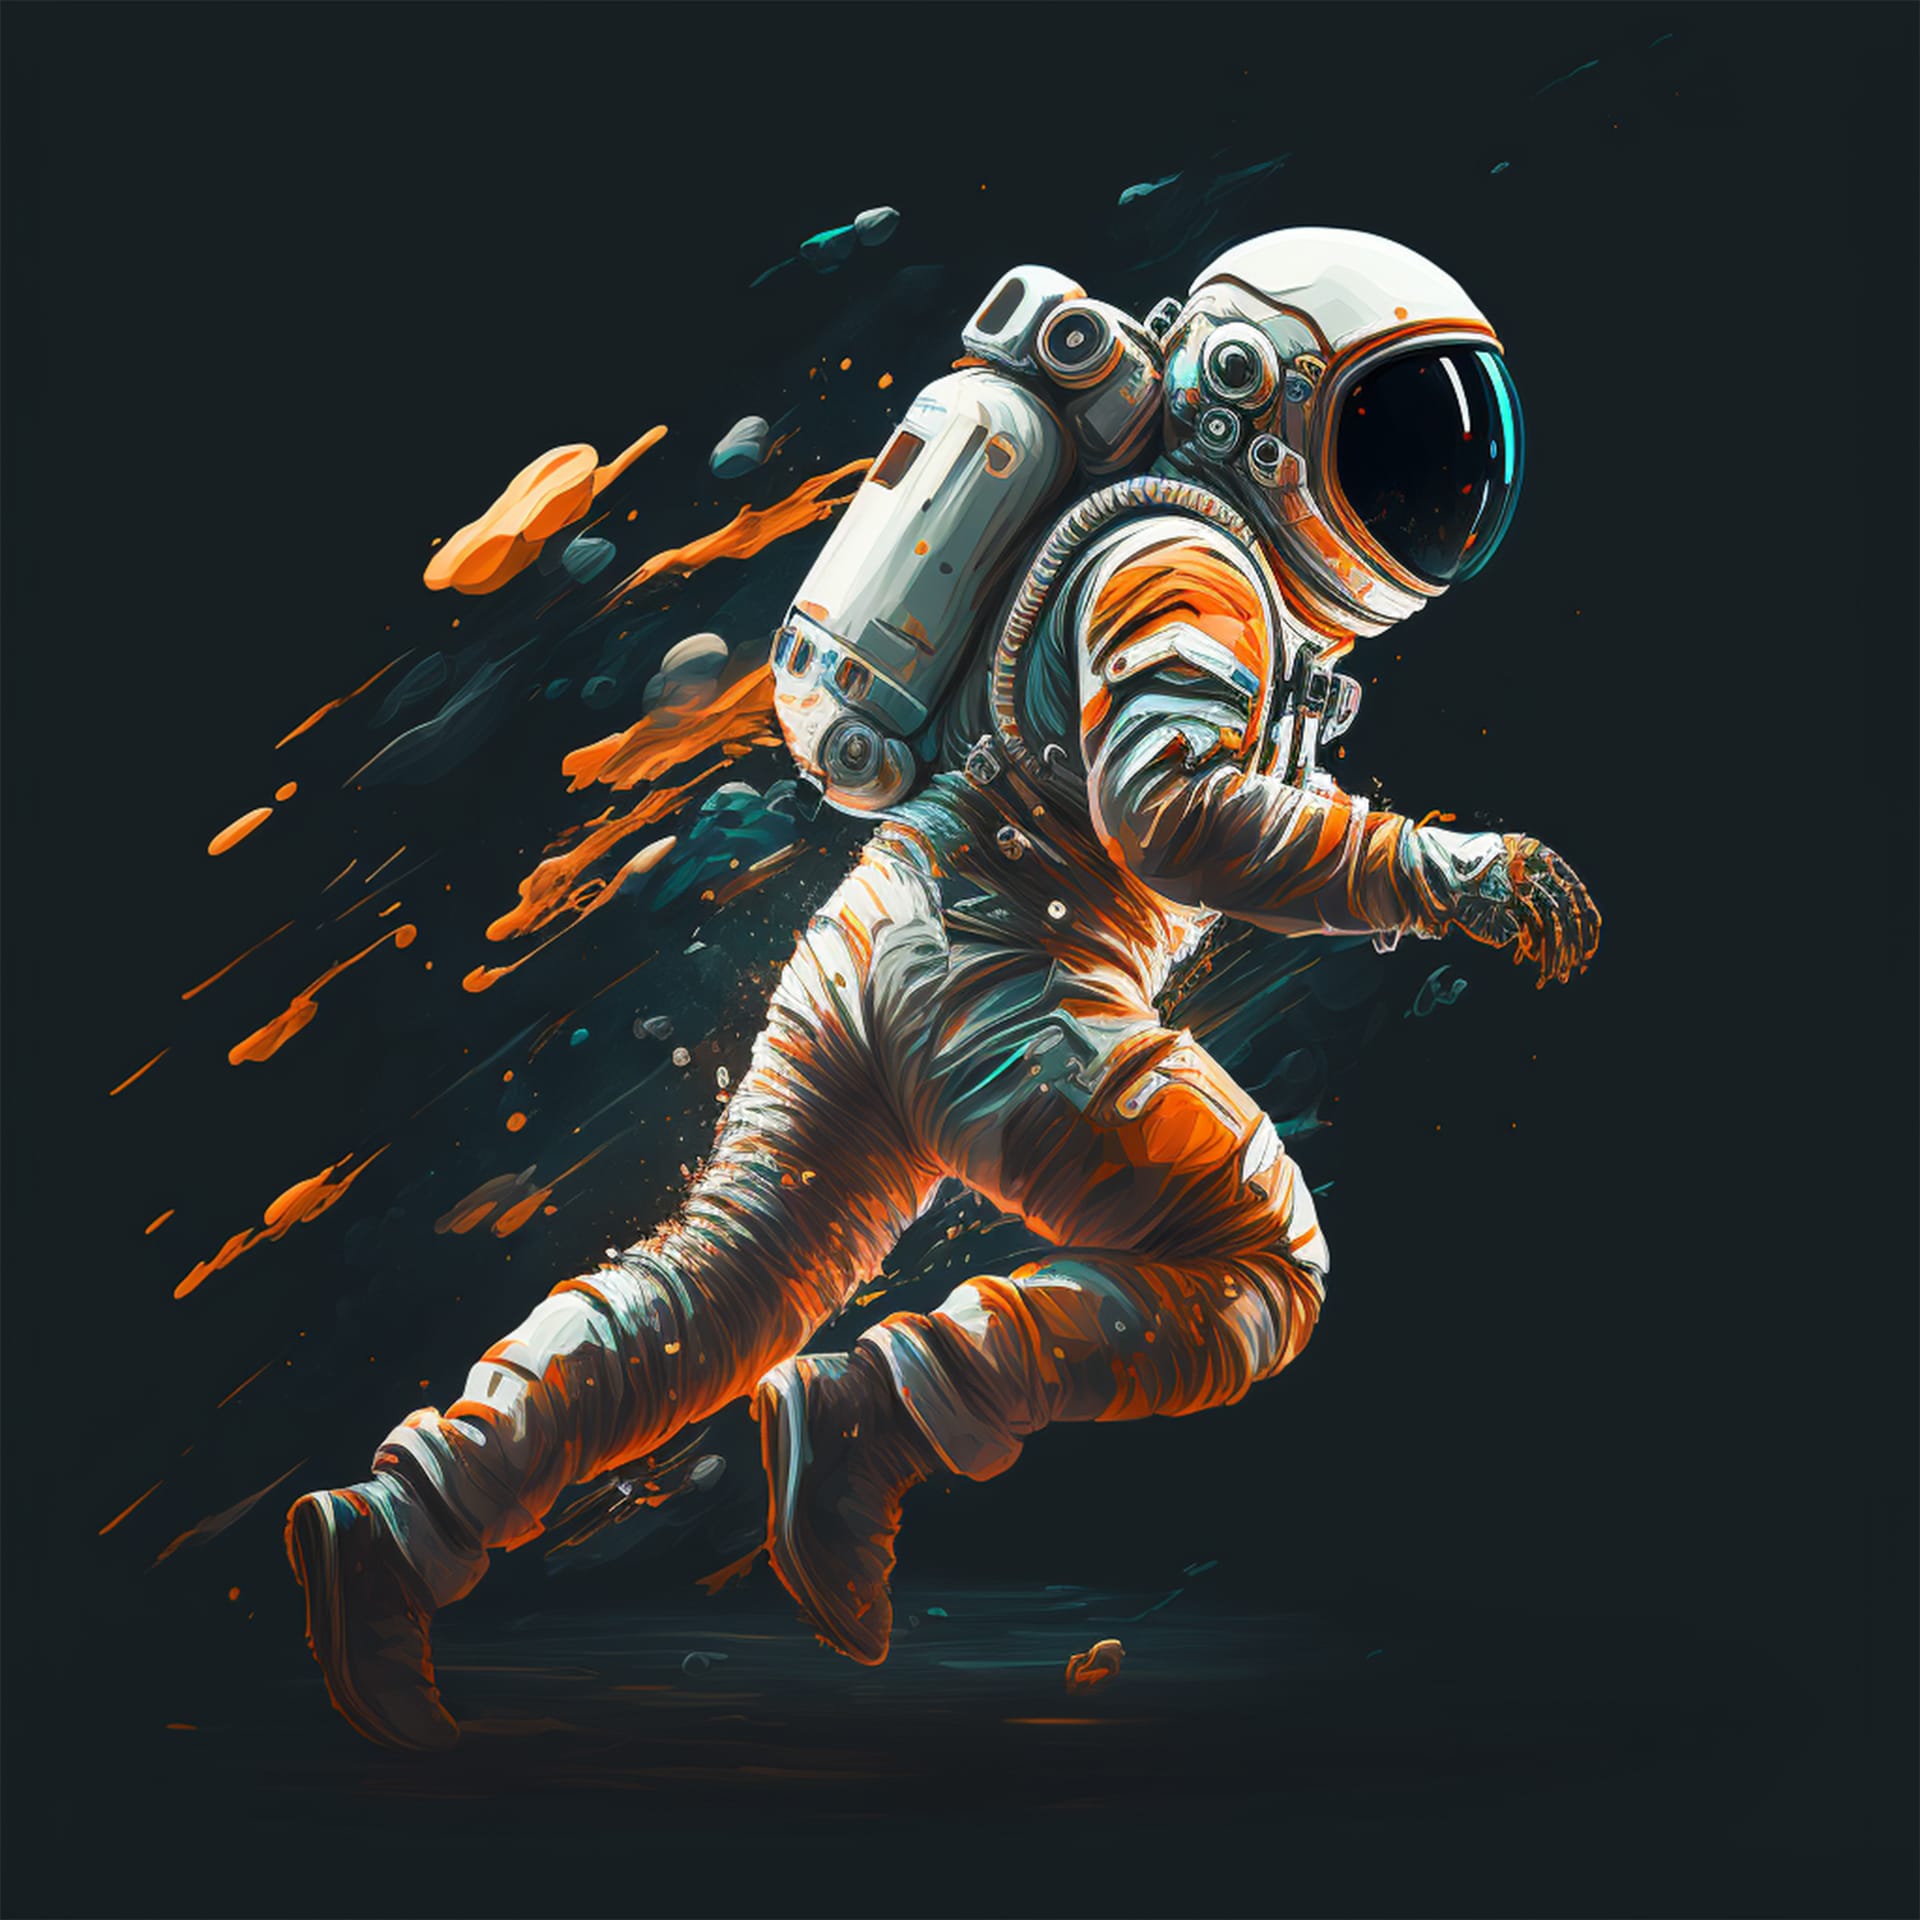 Astronaut digital art retro assets isolated black background excellent image